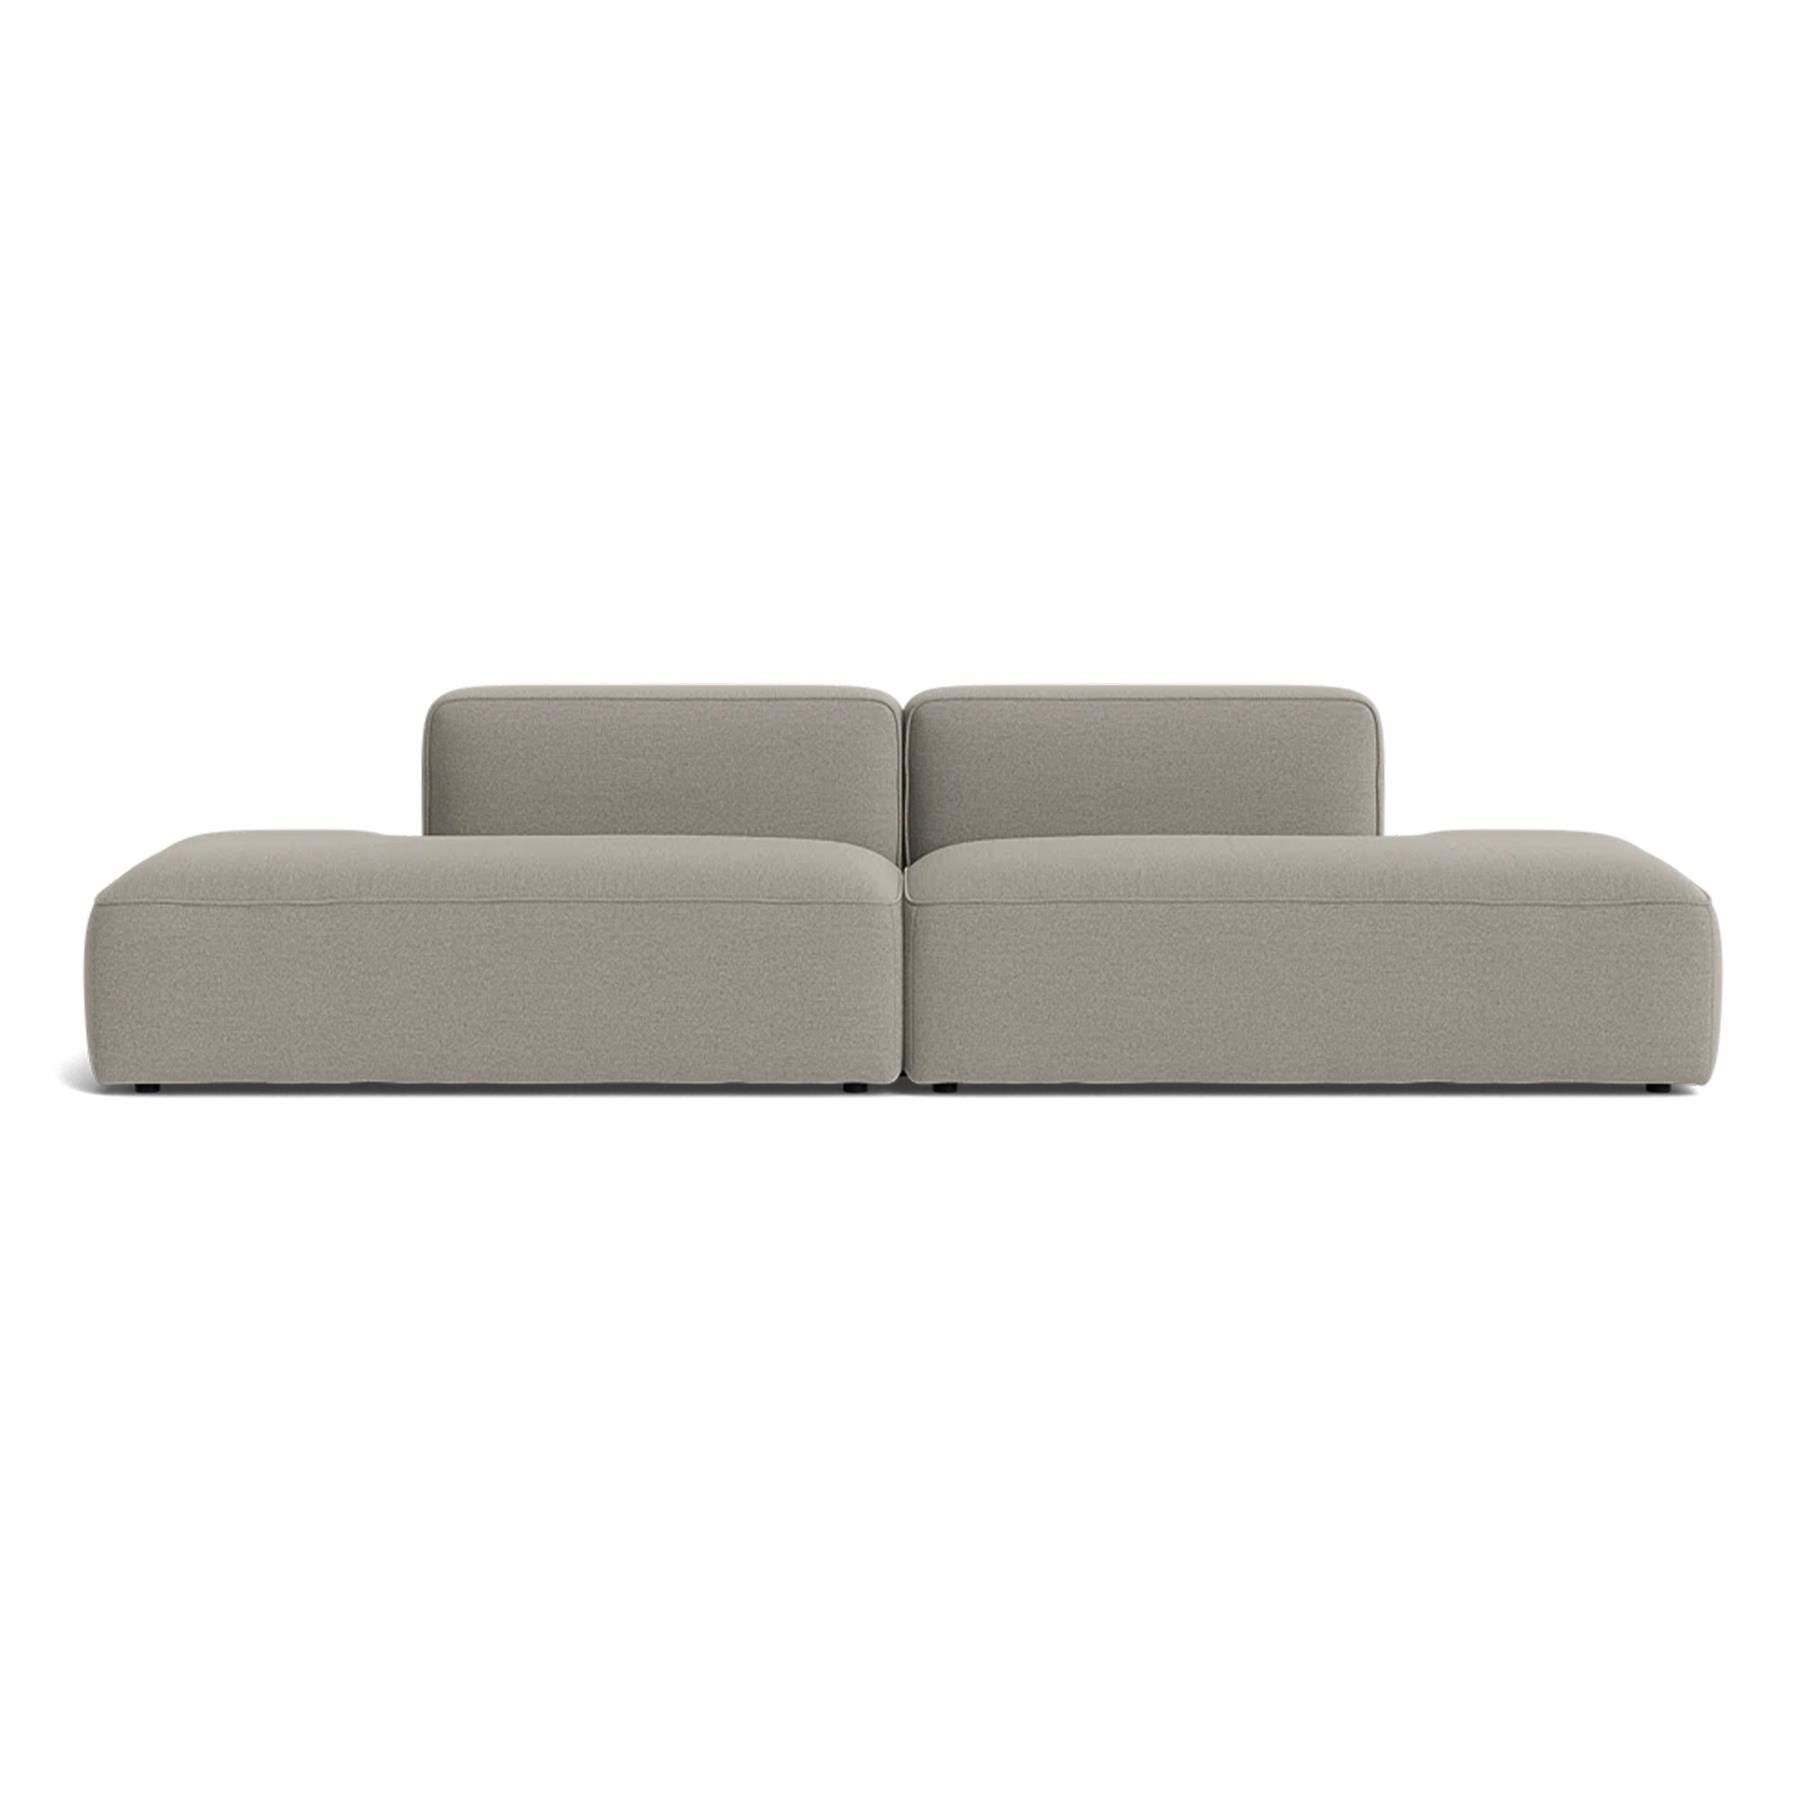 Make Nordic Basecamp Xl Sofa With 2 Open Ends Rewool 218 Brown Designer Furniture From Holloways Of Ludlow